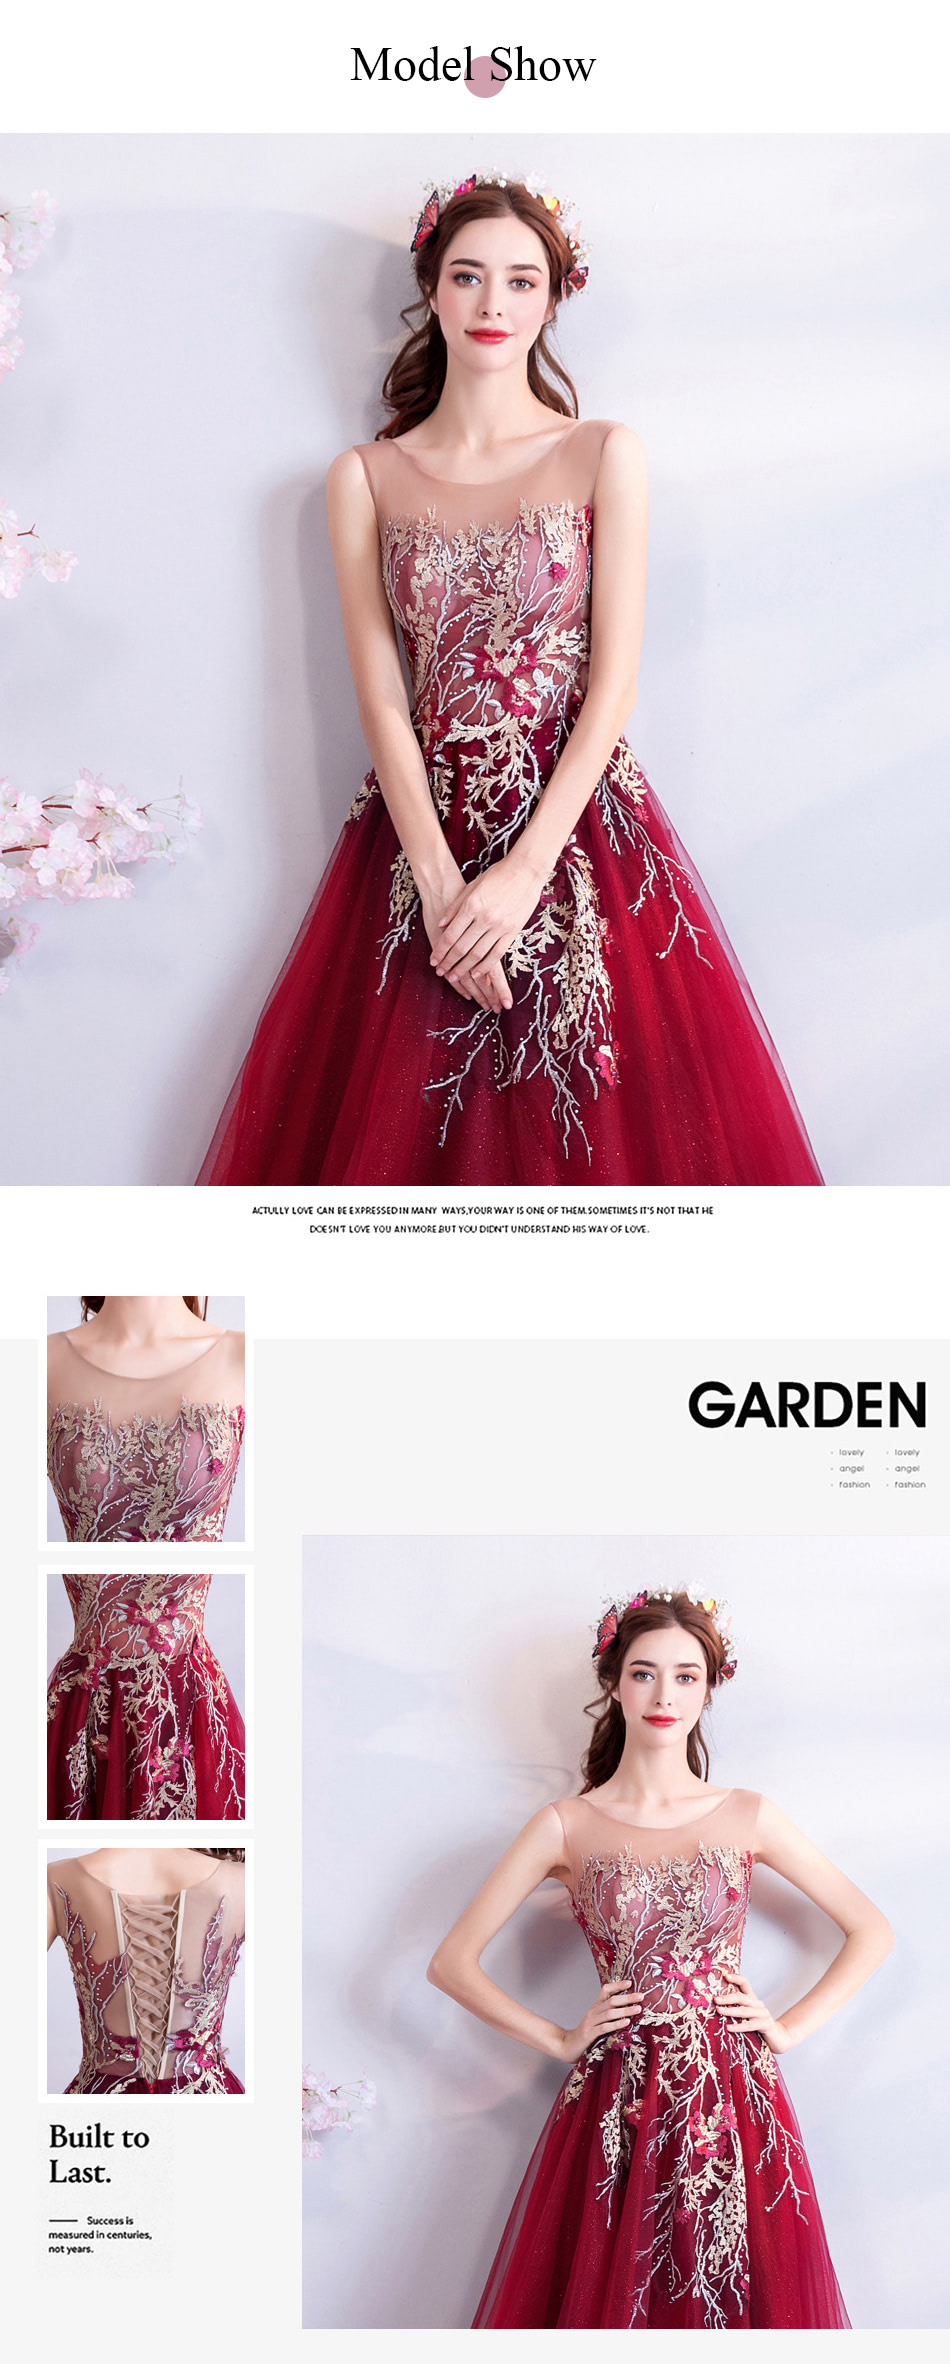 Gorgeous-Red-Couture-Dress-for-Wedding-Party-Prom-All-Occasions11.jpg